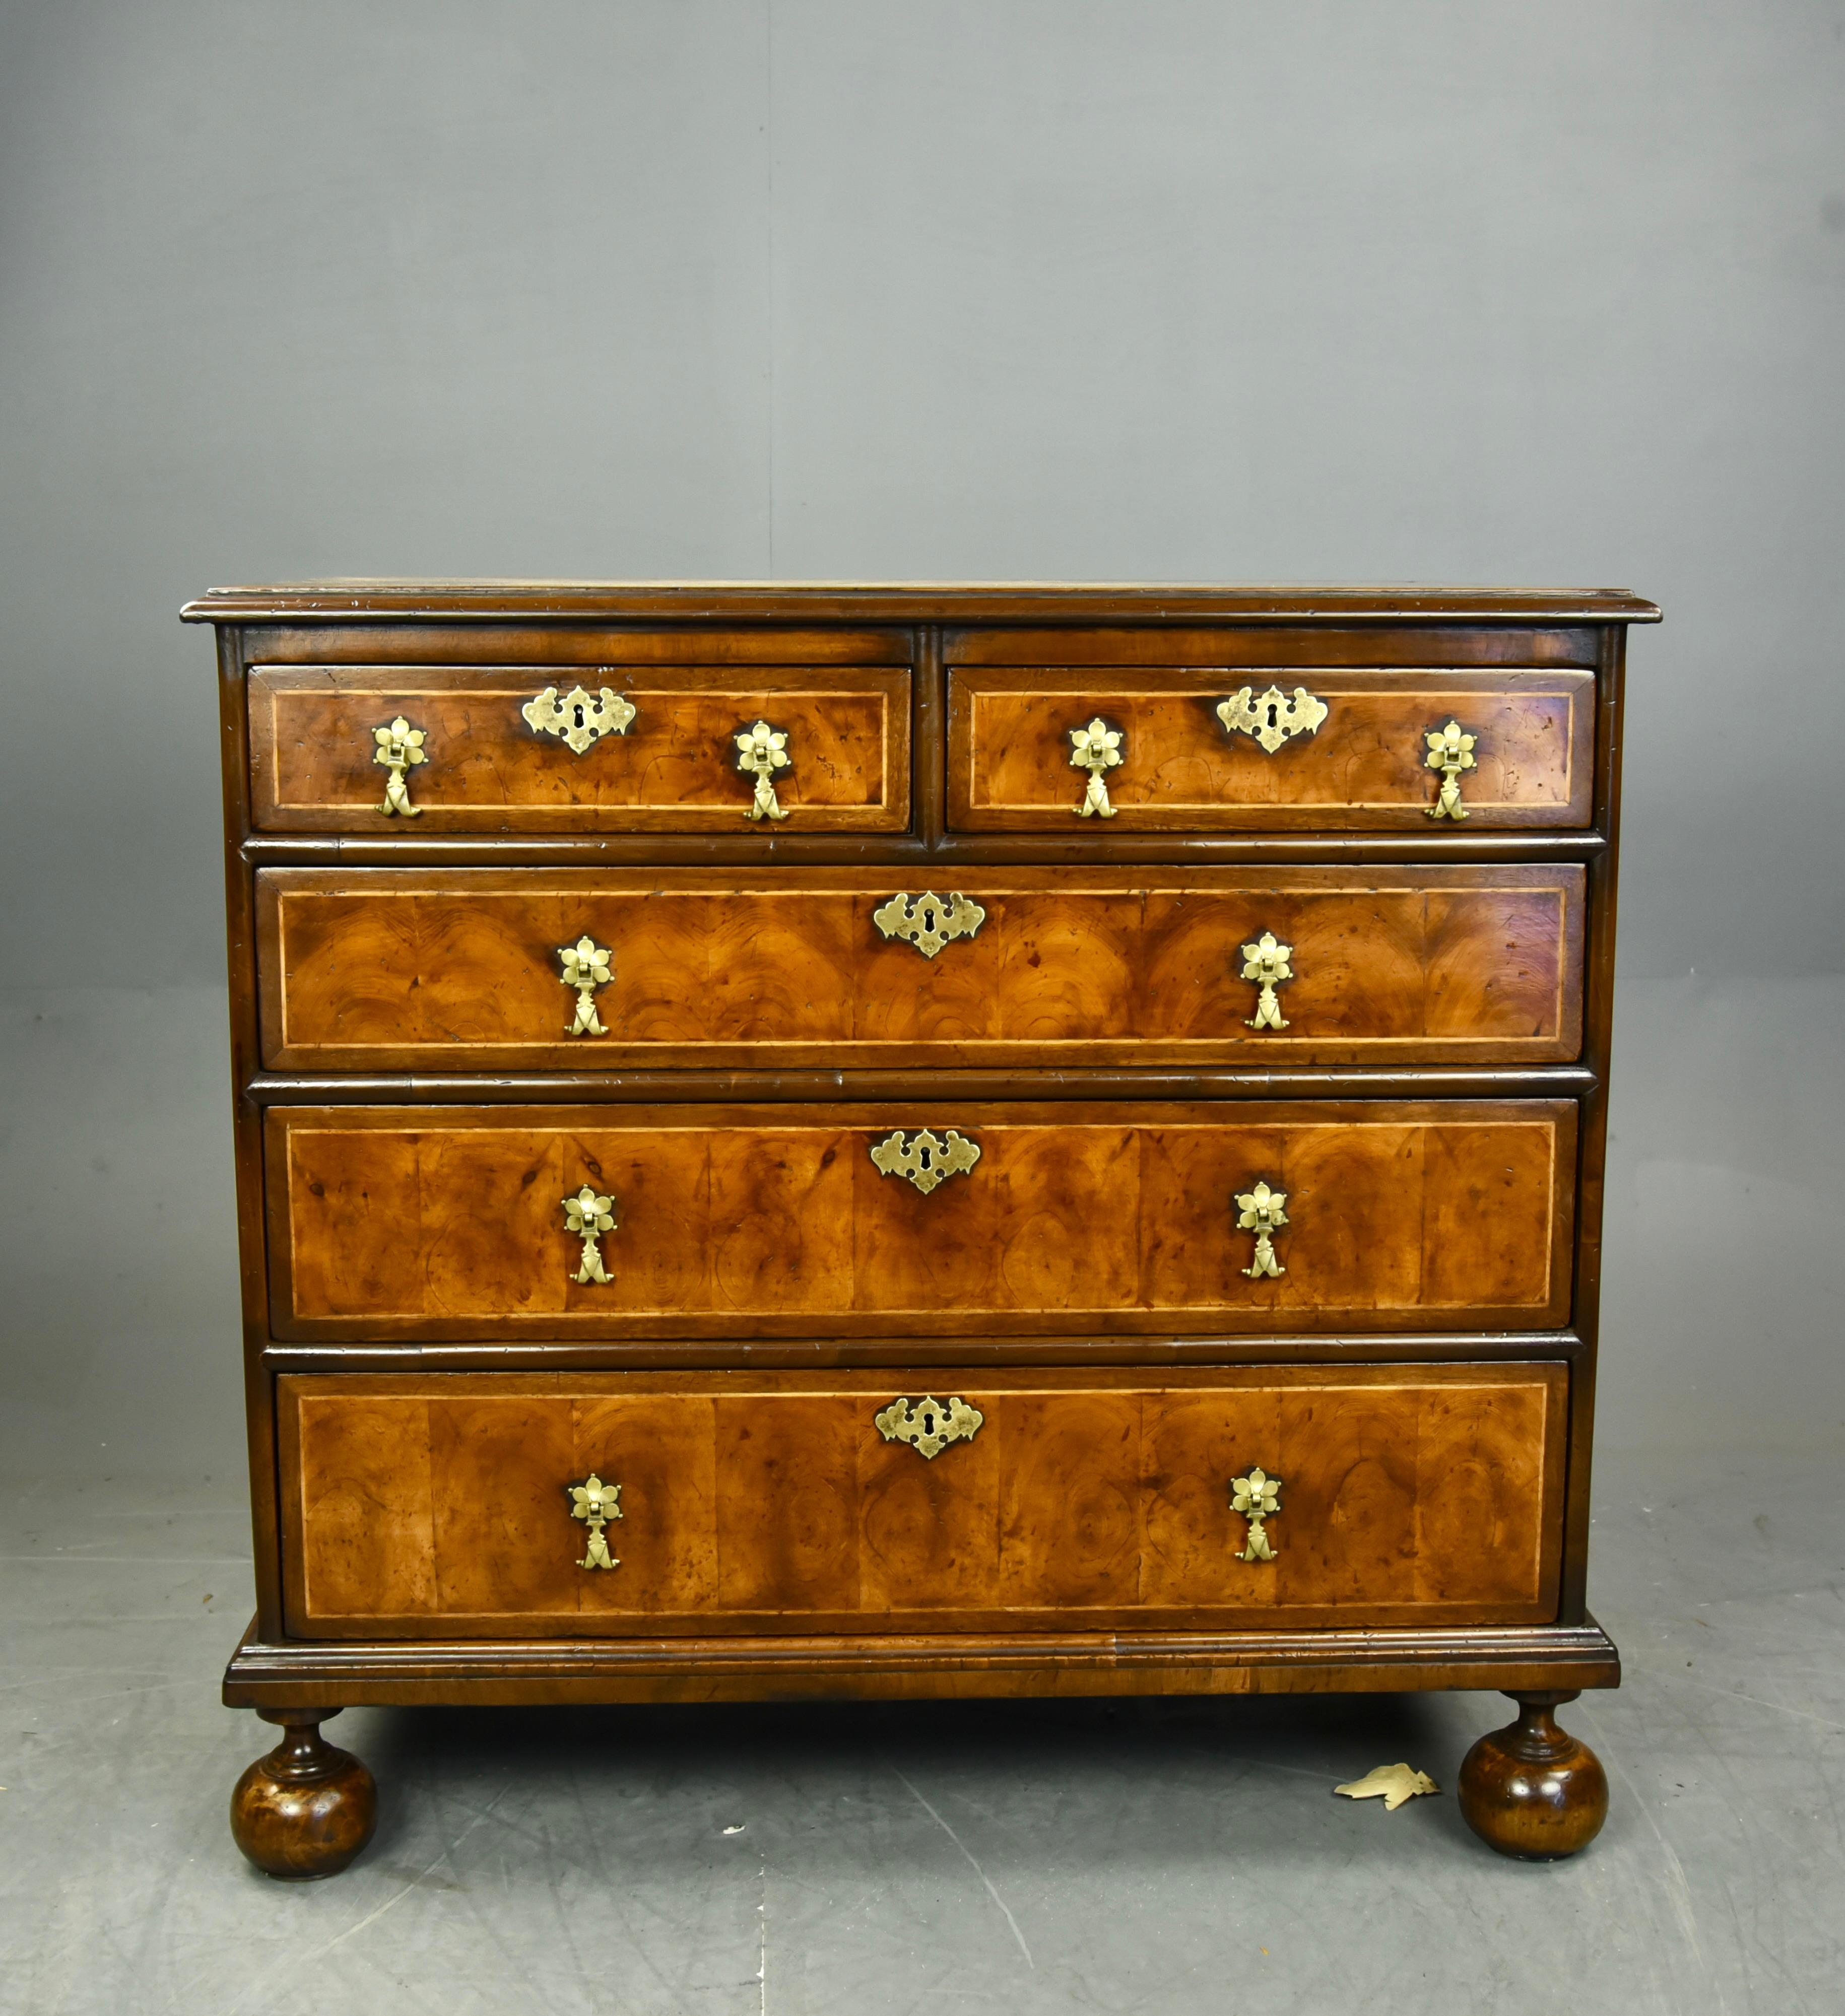 A fine quality late 18th century Queen Anne style oyster veneer chest of drawers.
This stunning chest of drawers has very fine yew oysters with beautiful end crown grain that make this chest of drawers stand out from the crowd.
Oyster chests are